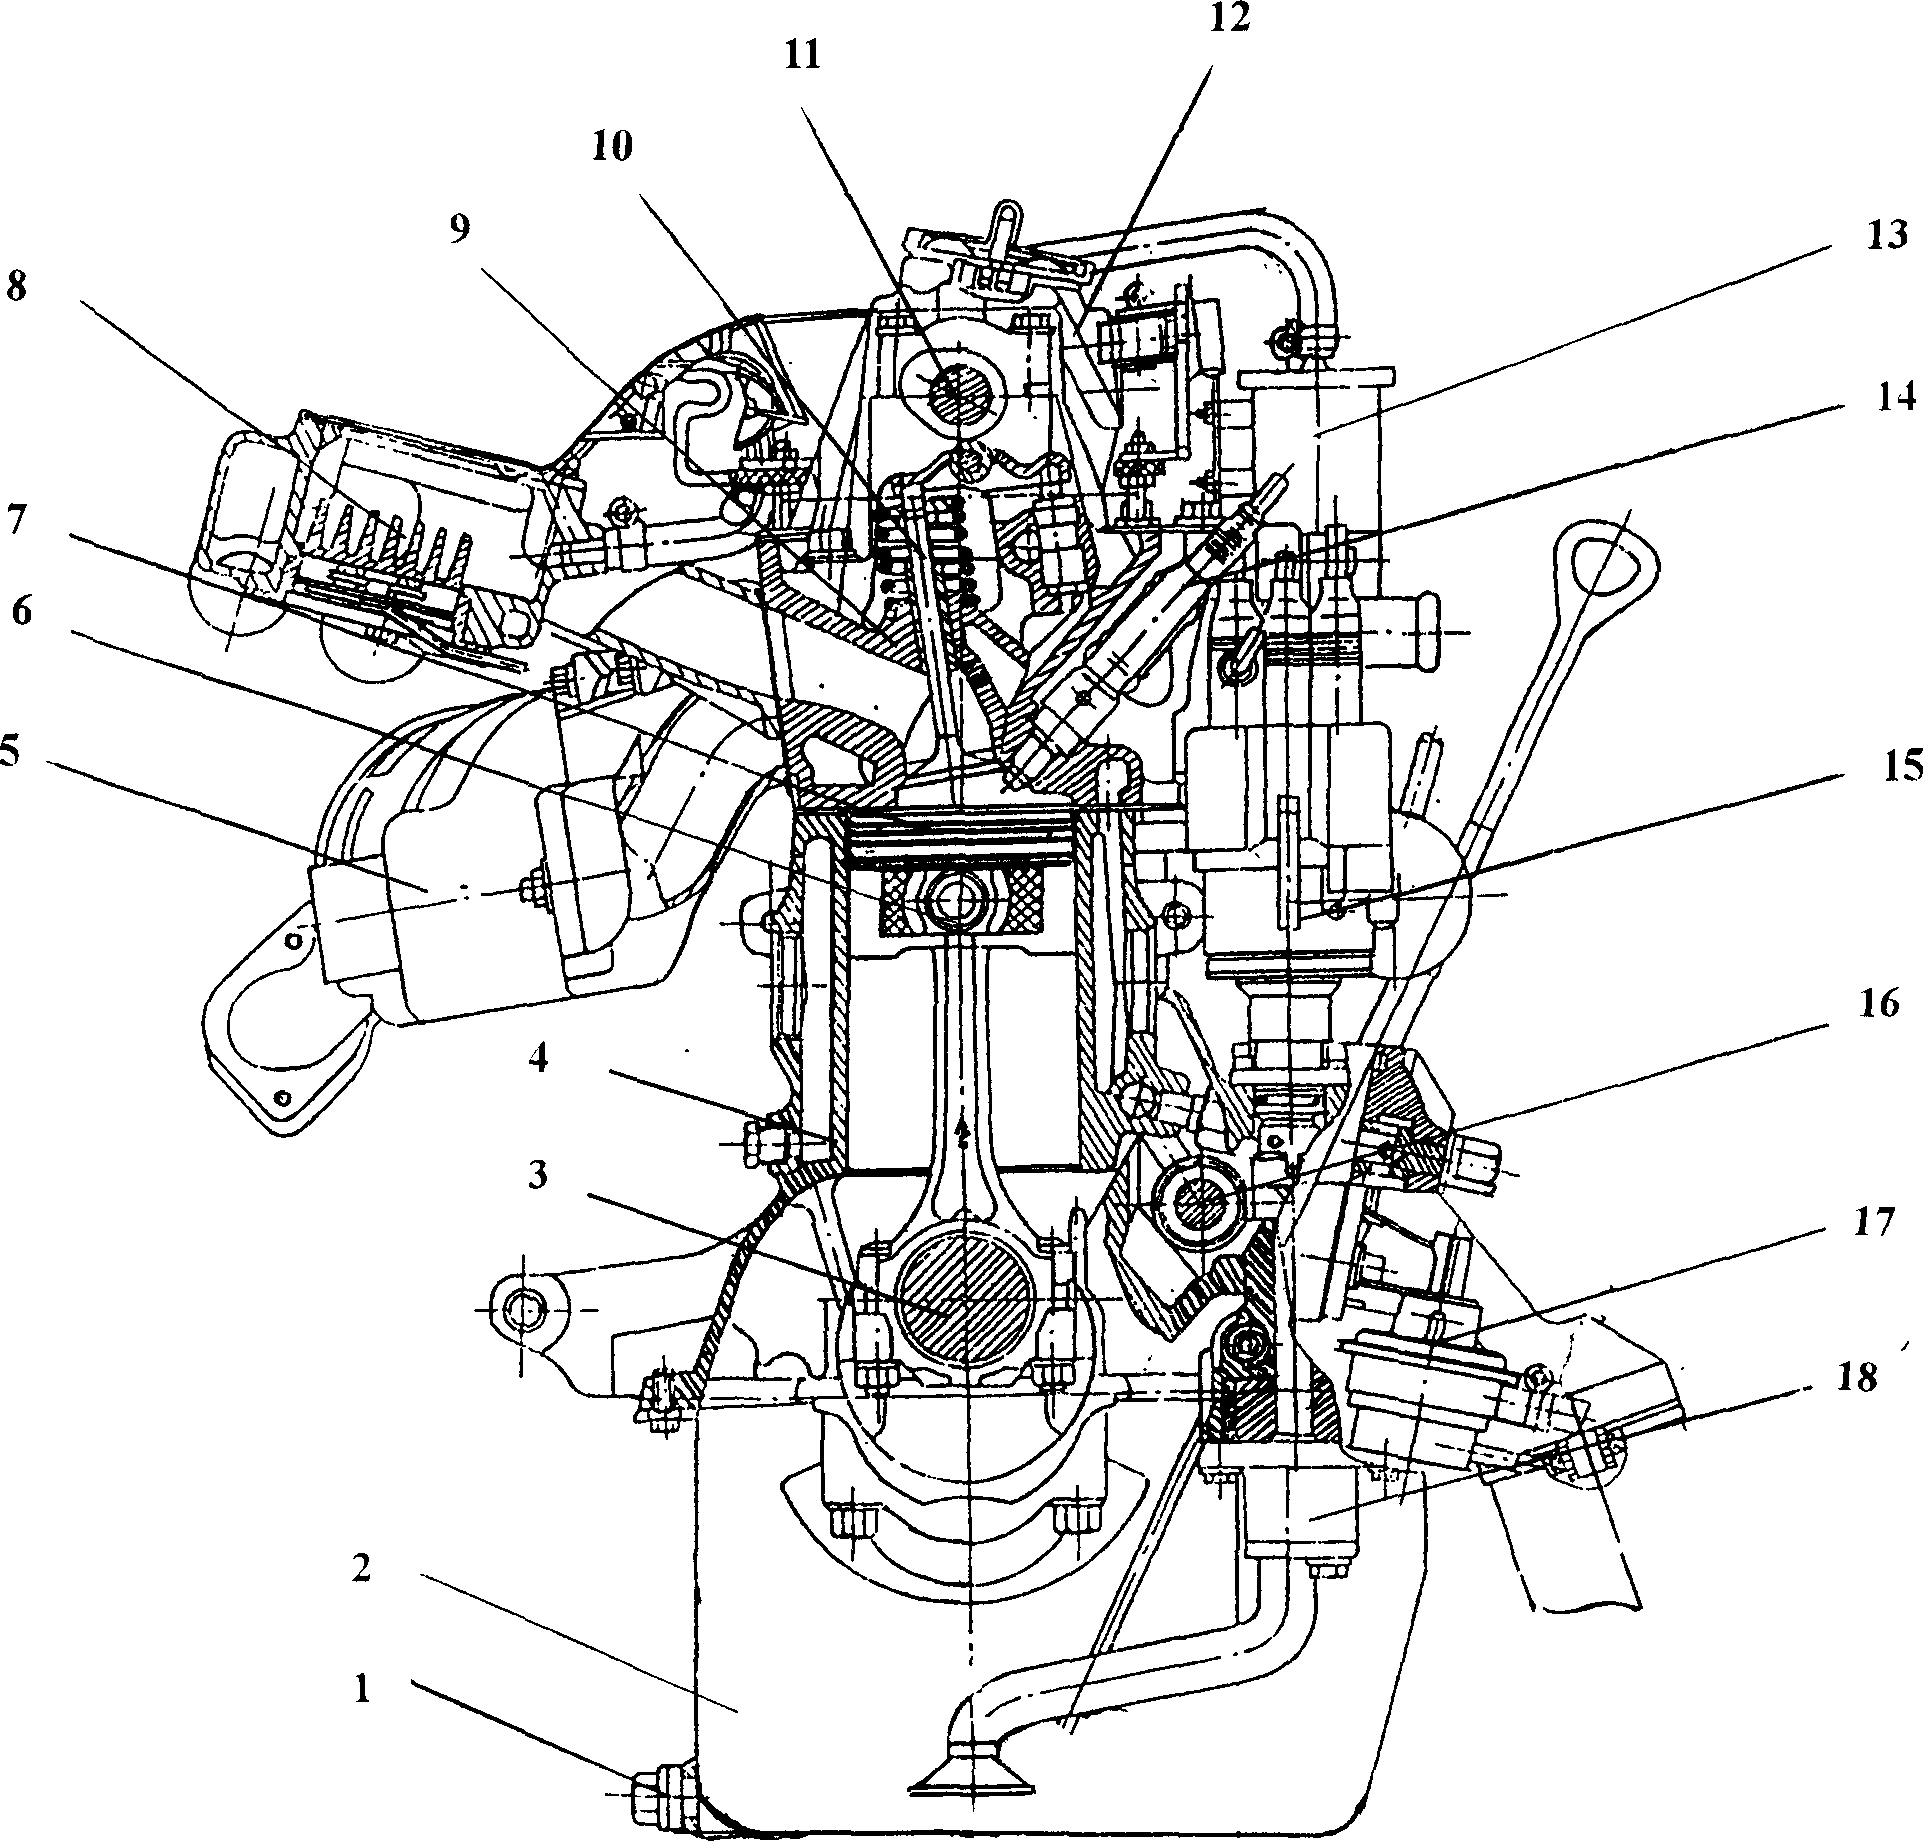 Combined piston gas ring internal combustion engine